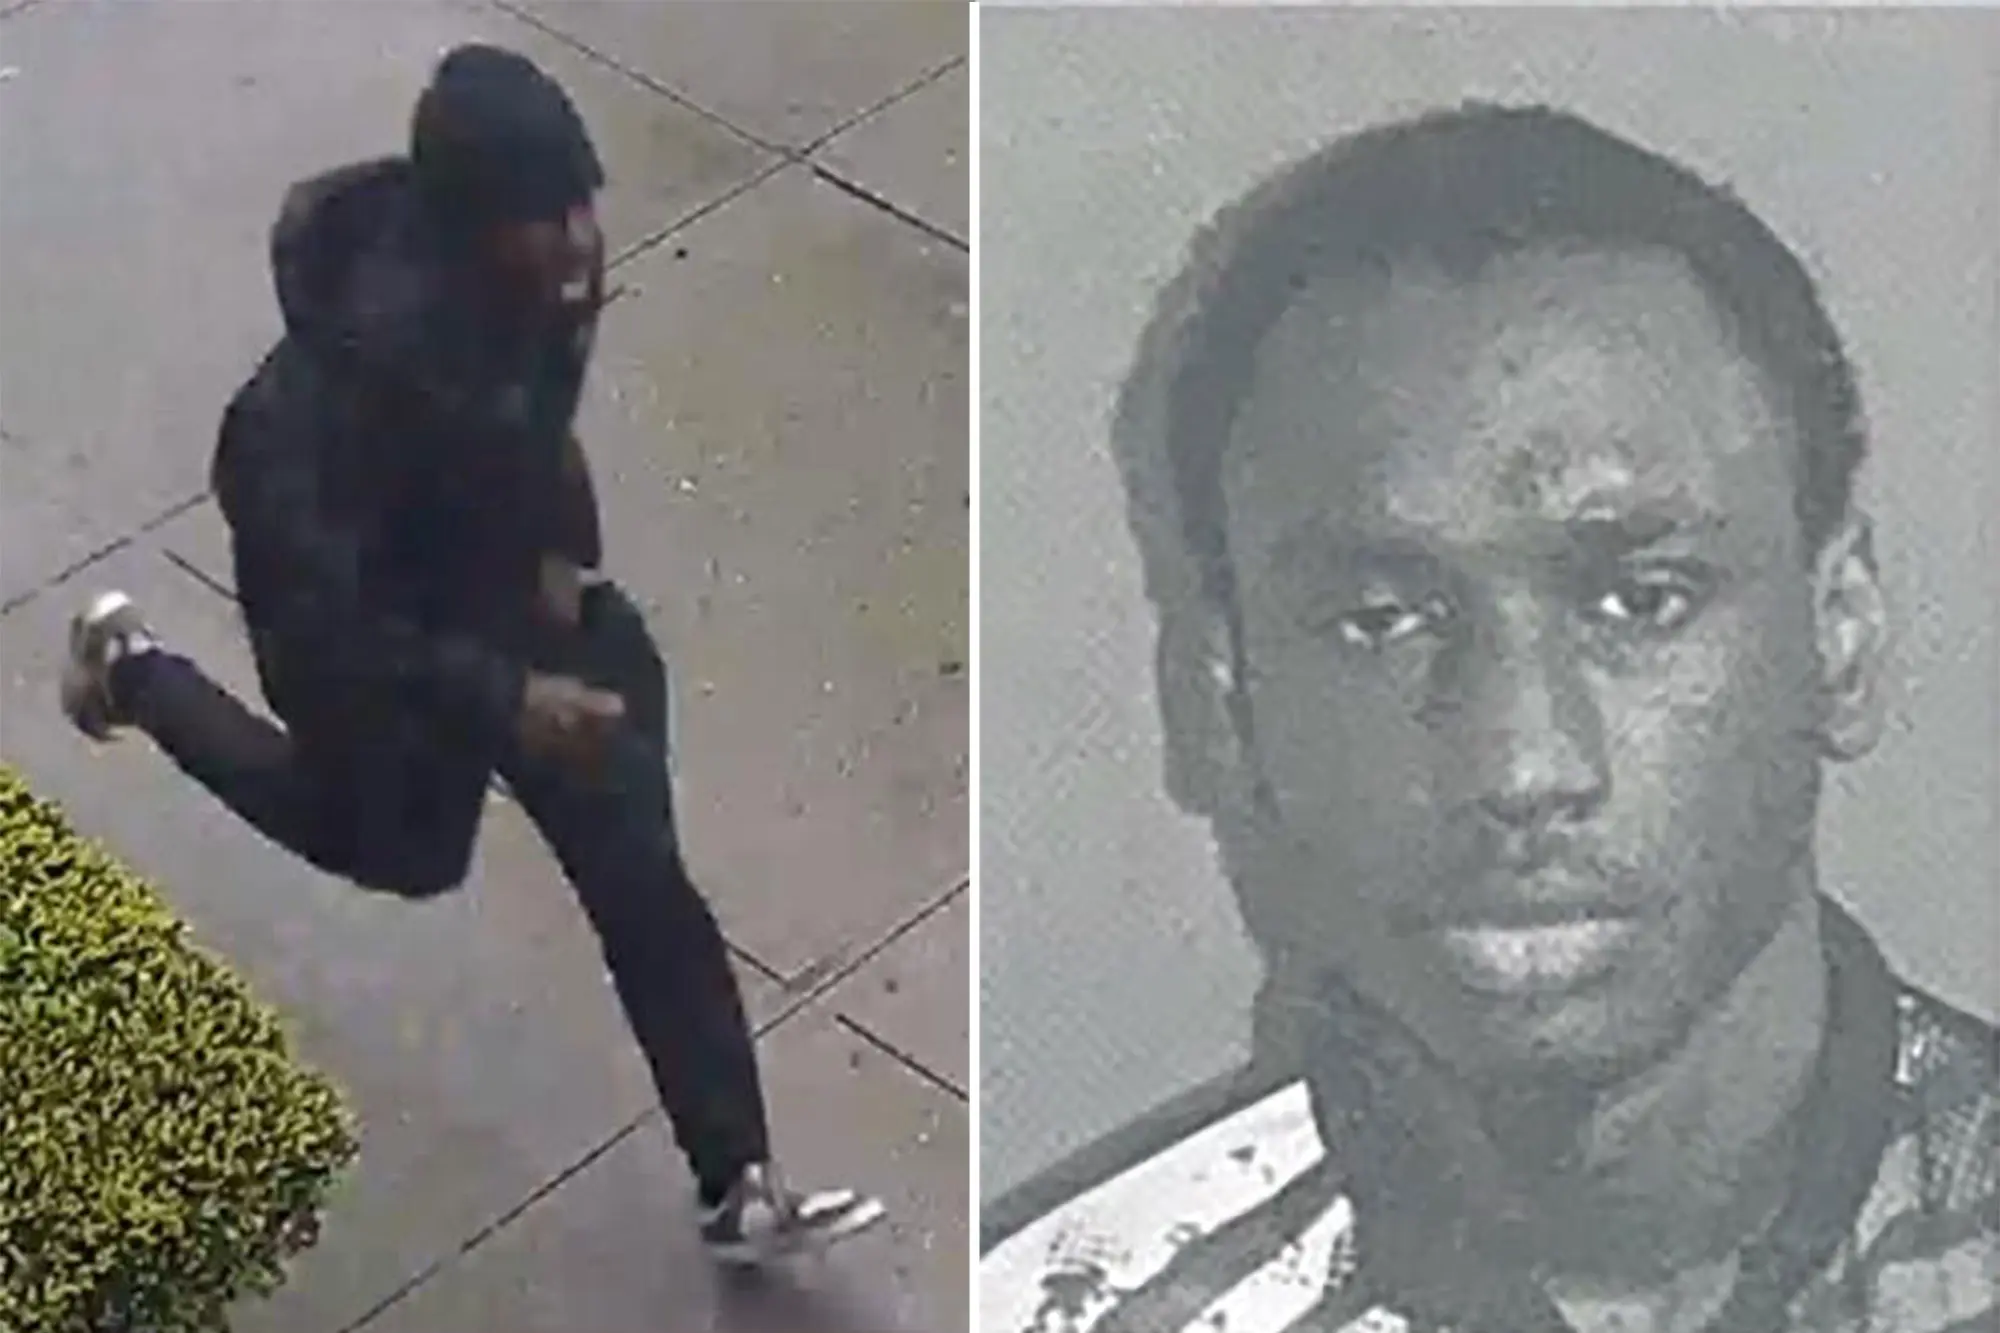 NYC Police Arrest Paroled Violent Homeless Man for Assaulting 72-Year-Old Woman in Random Attack